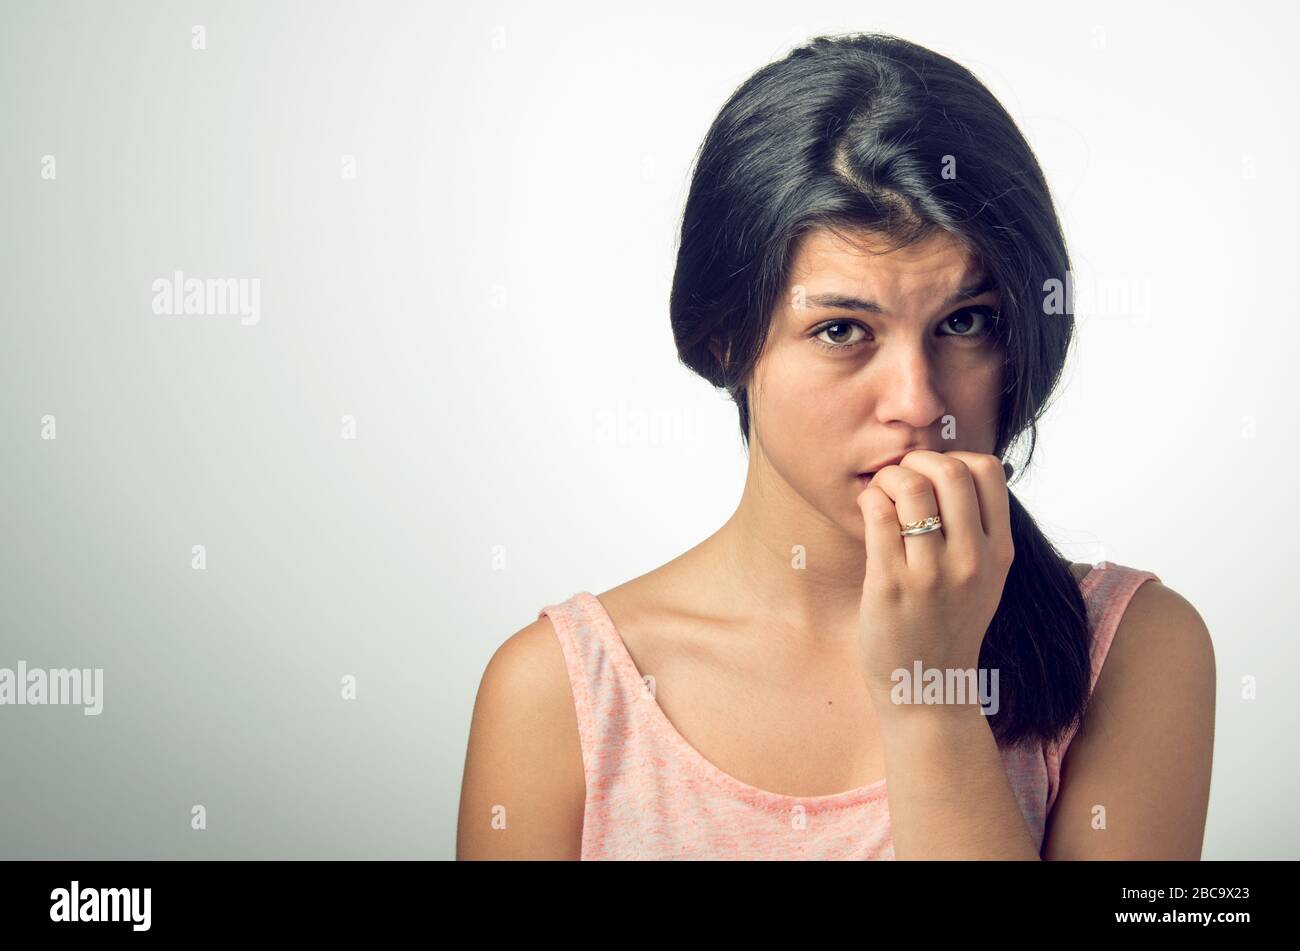 Portrait of a teenager brunette girl with nervous expression and nail-biting Stock Photo